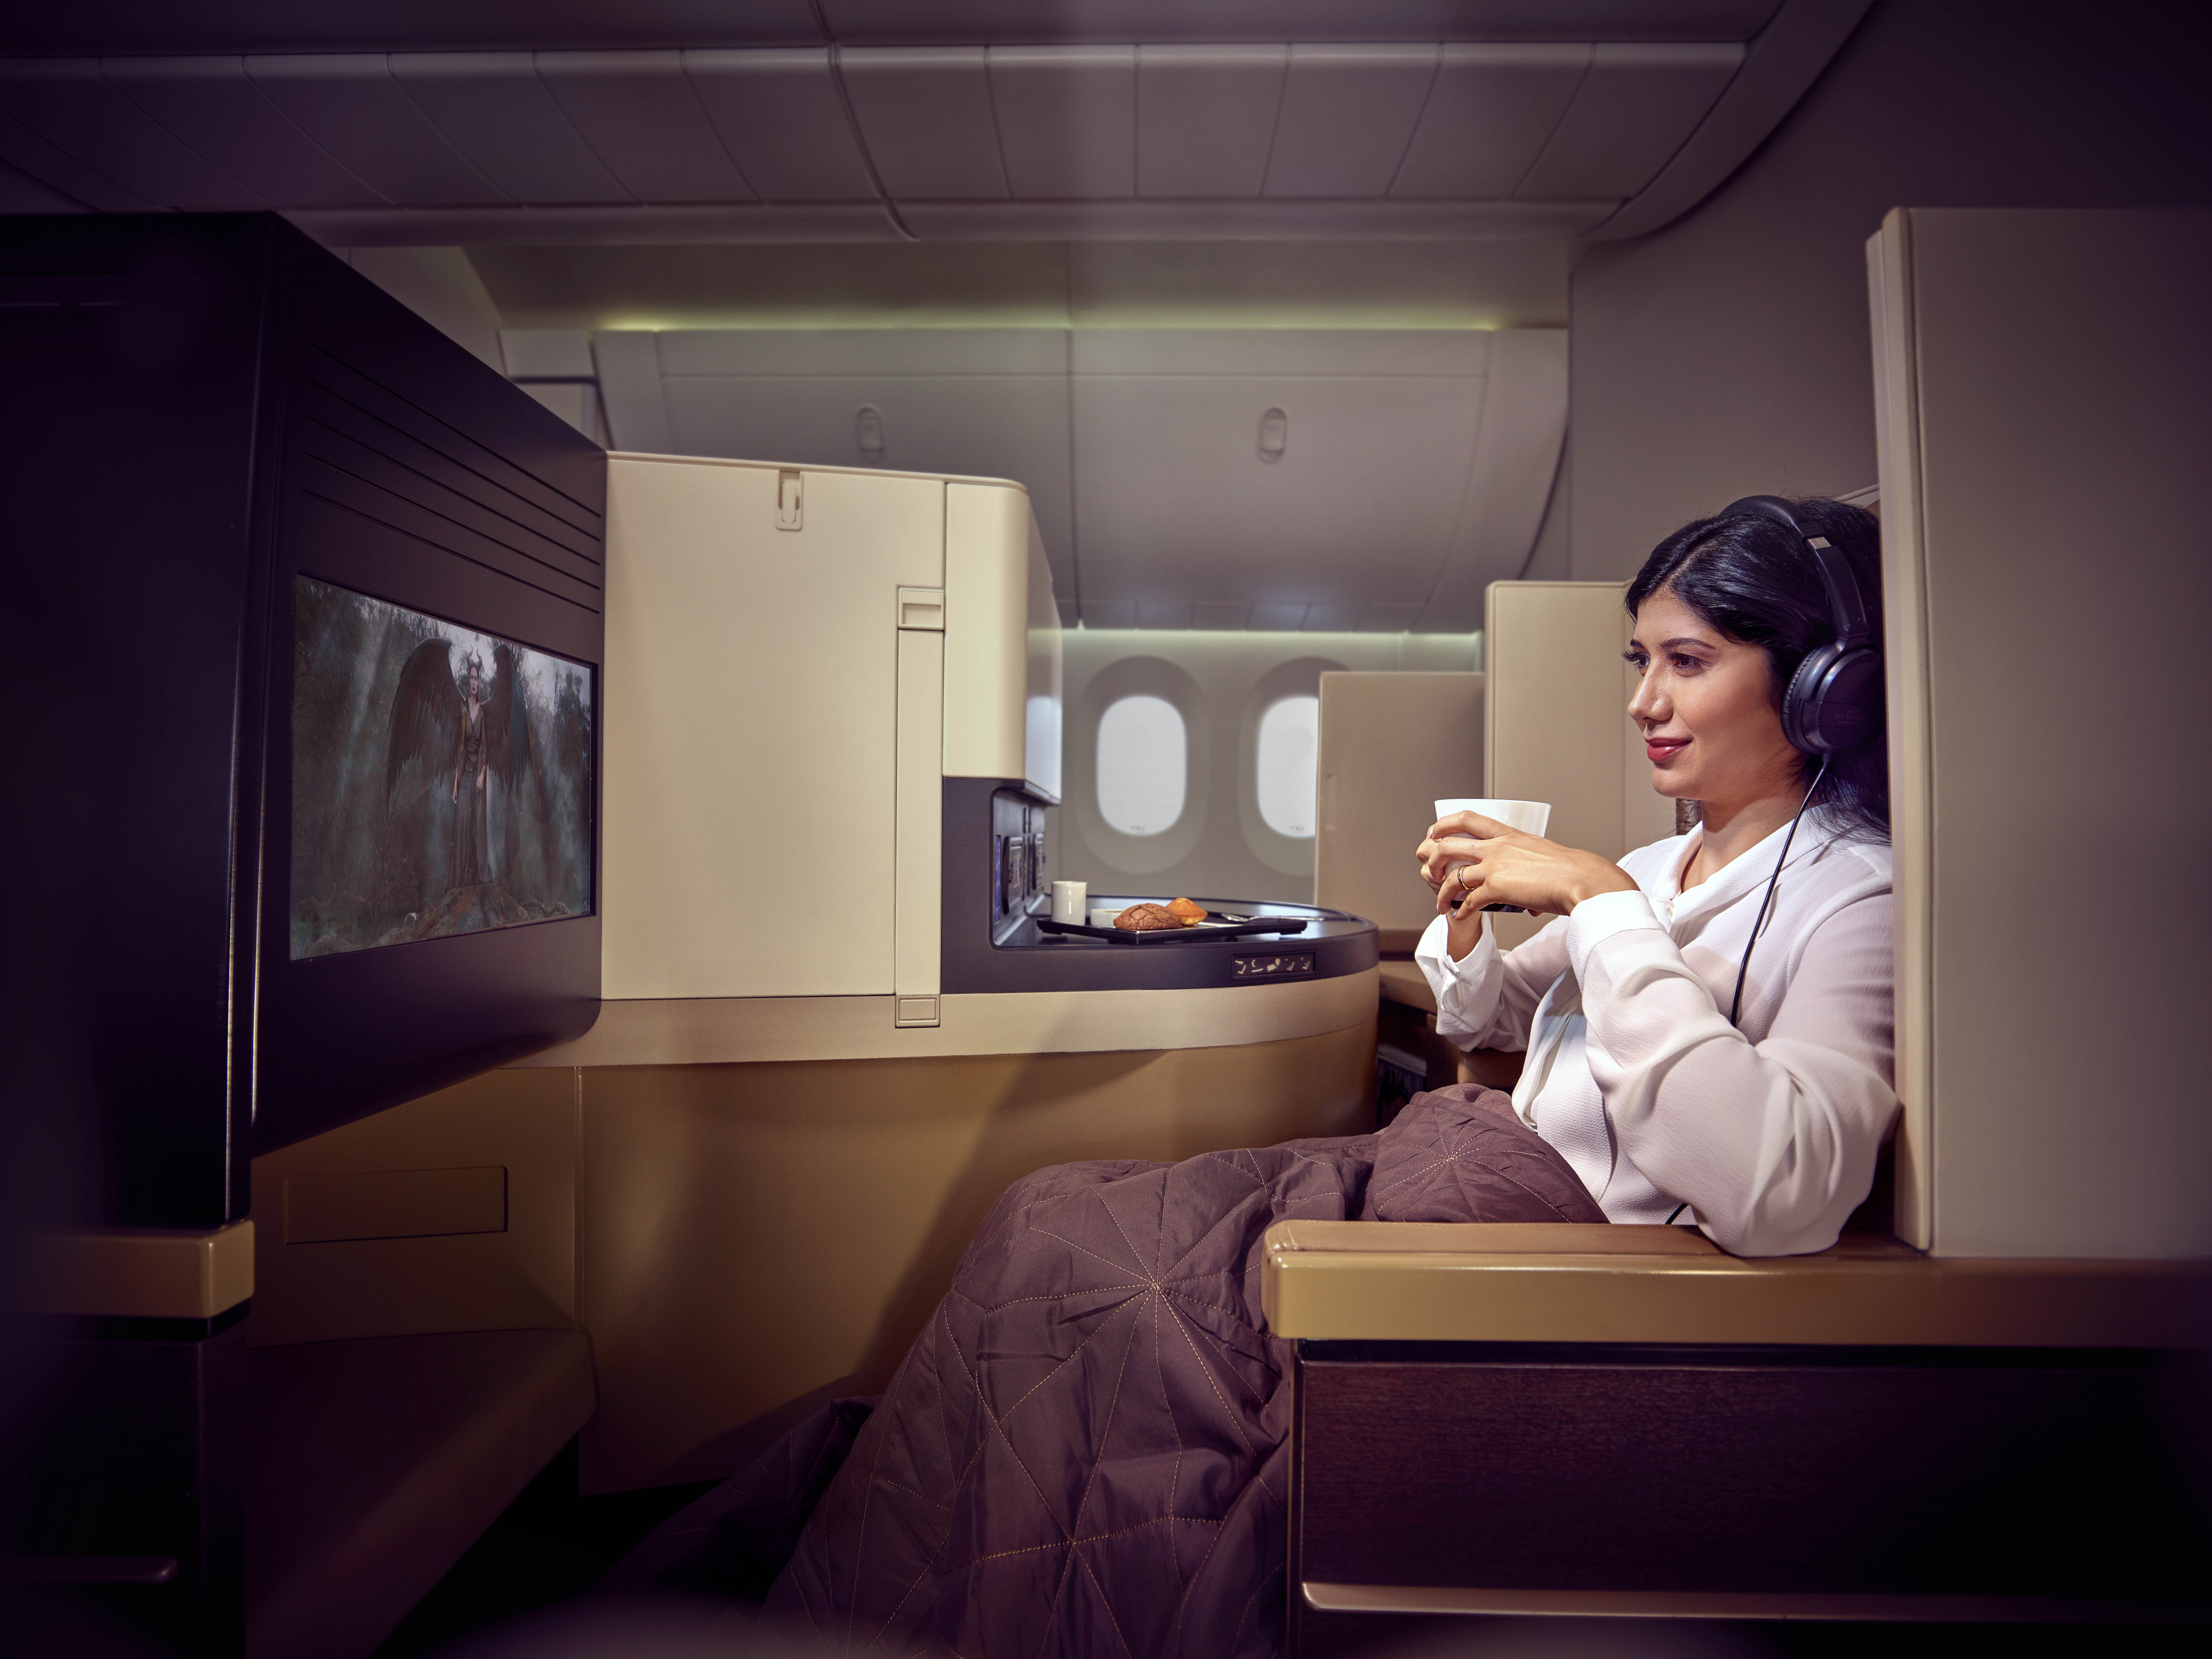 Fare wars! Middle East and India to the US in Business Class starting from $1,740USD